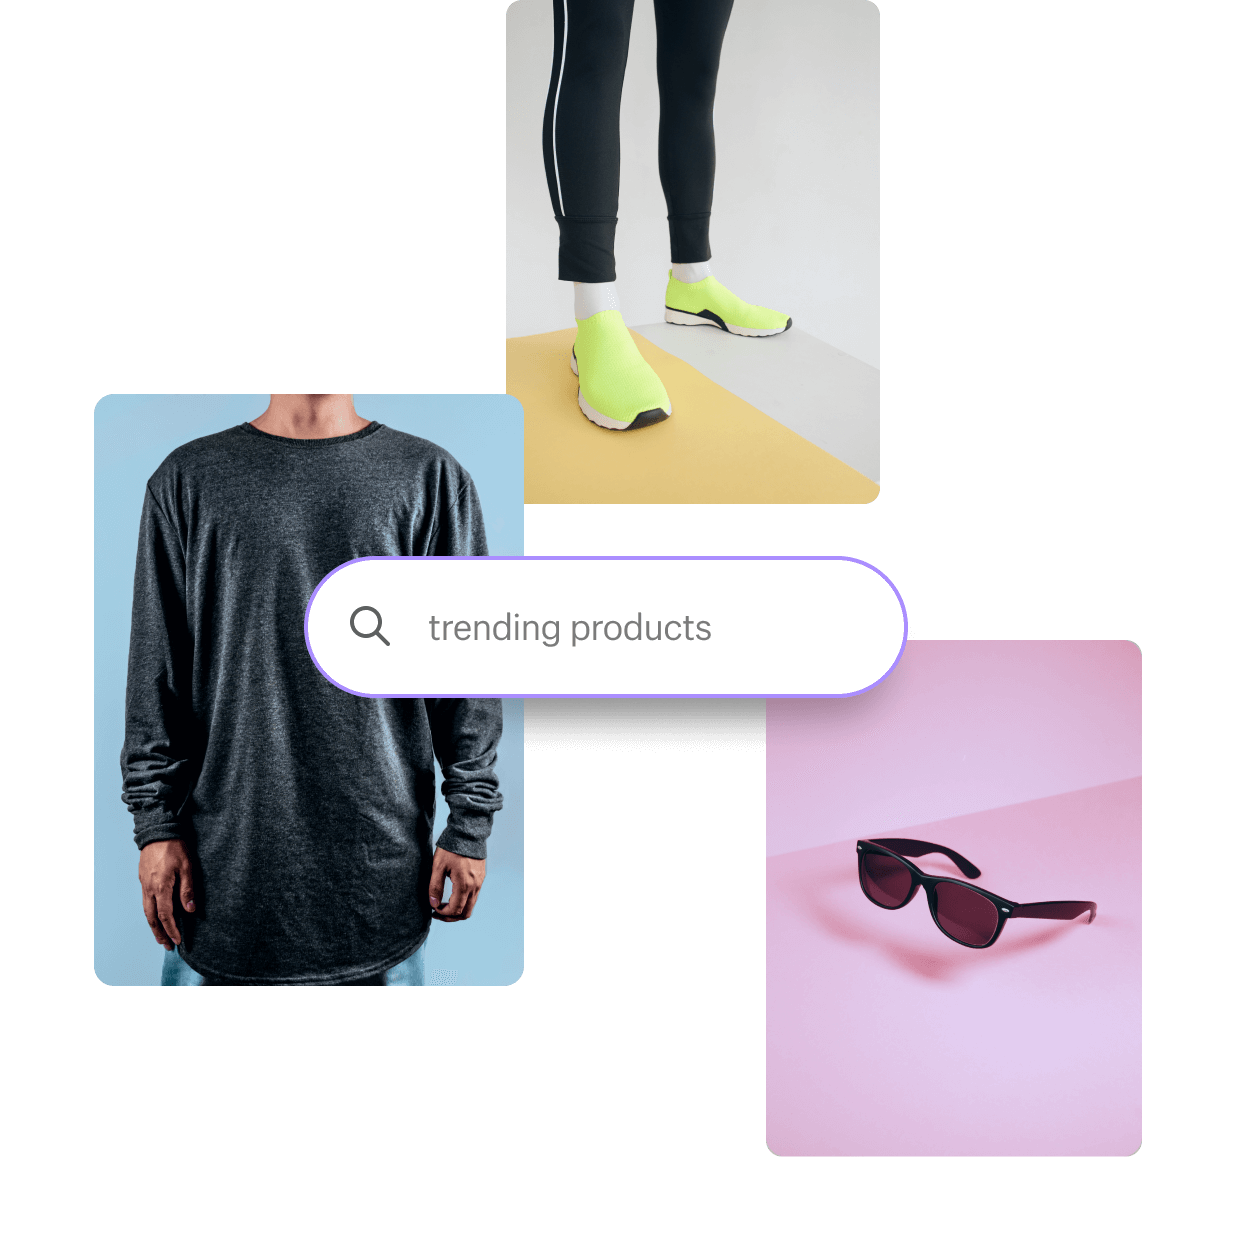 A search bar with the text of Trending Products hovers over three product images: a black t-shirt, classic sunglasses, and bright green running shoes.